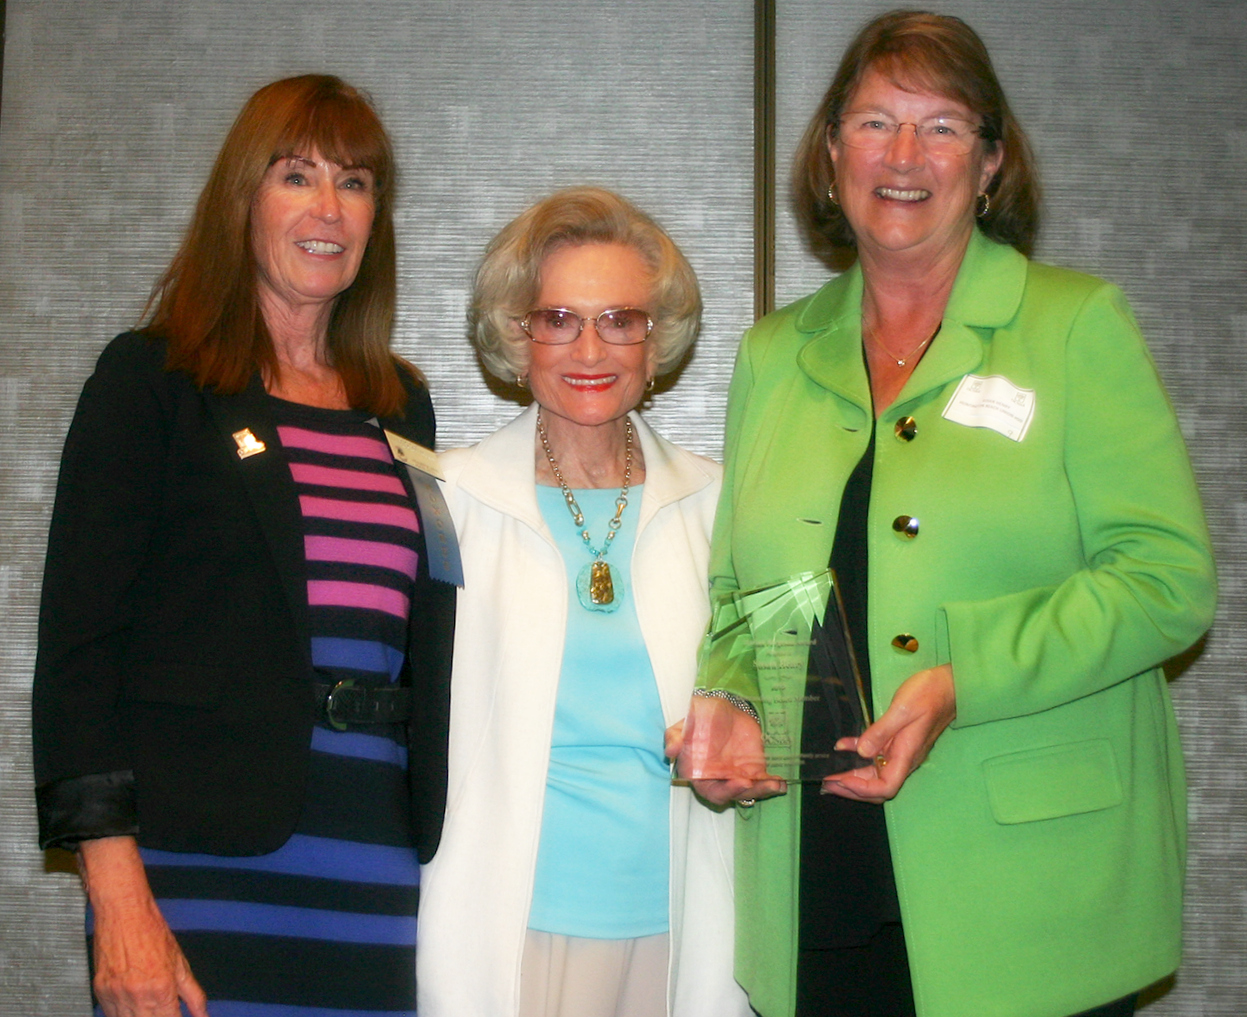 Susan Henry, president of the Huntington Beach Union High School District’s Board of Trustees, with an award